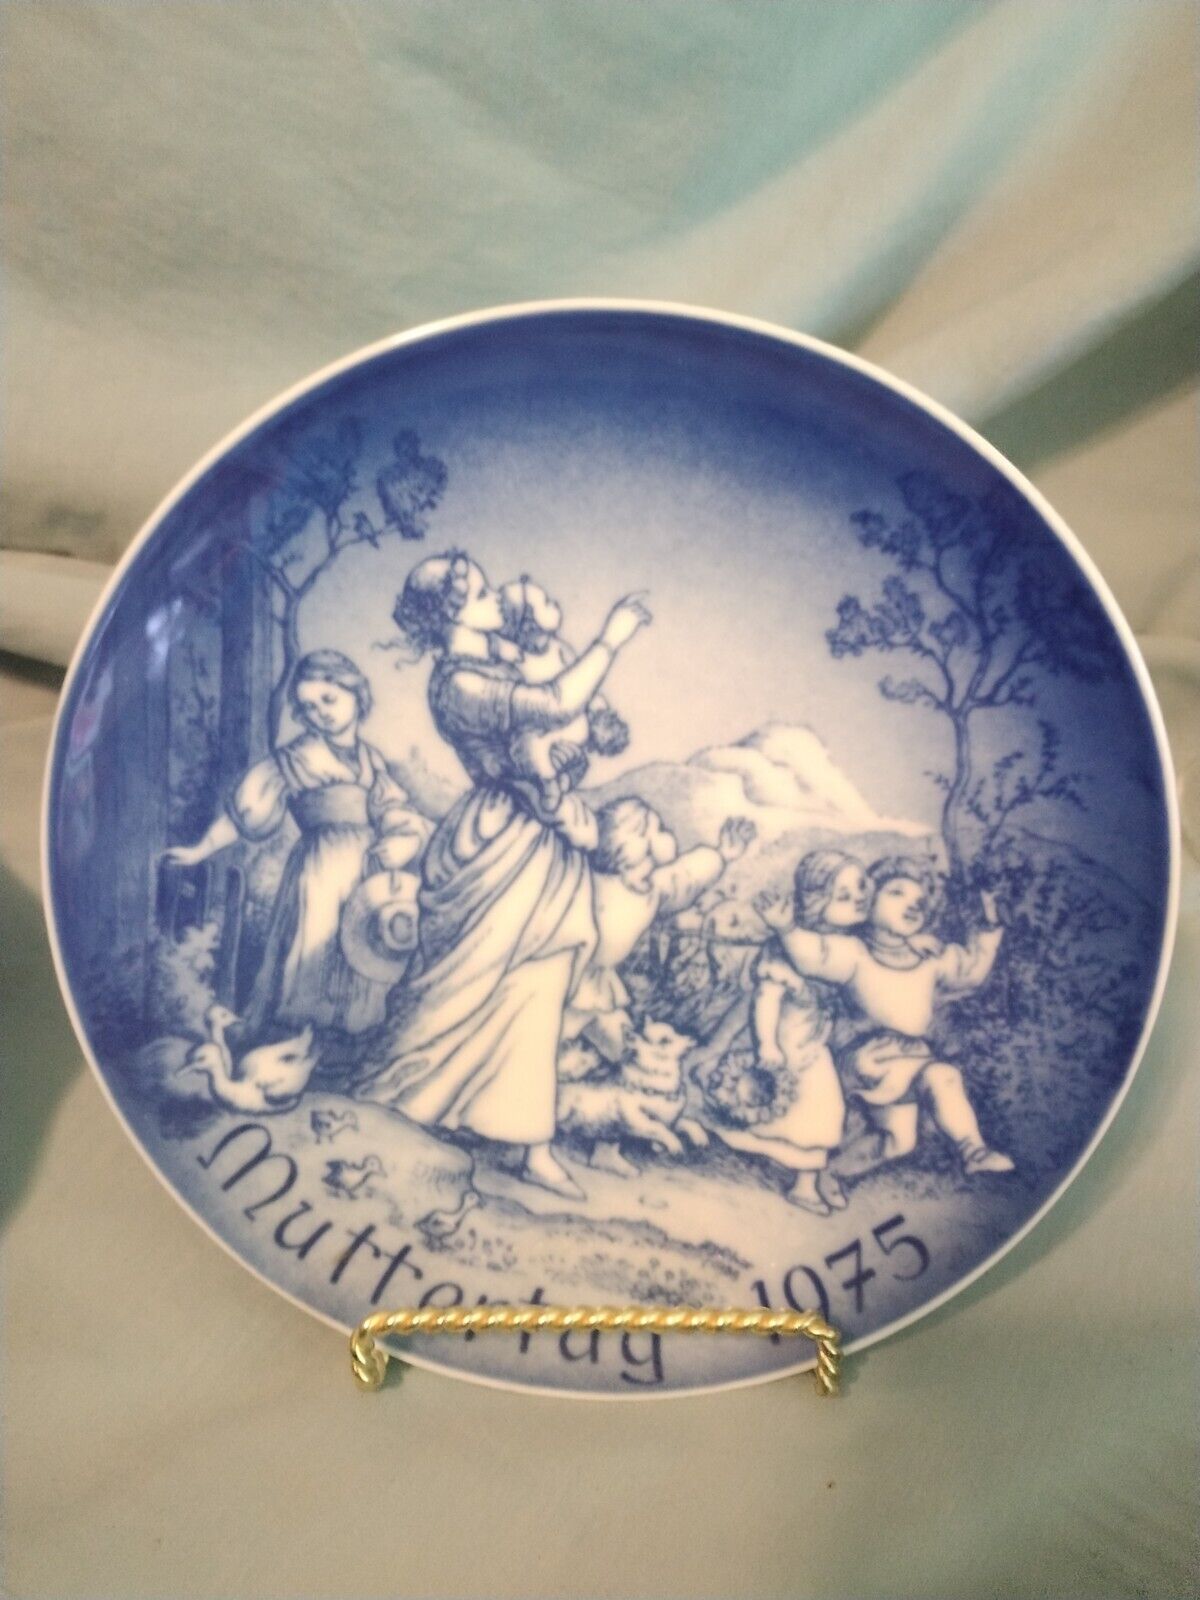 Vintage Bareuther Bavaria Germany Muttertag Mothers Day Plate 1975 